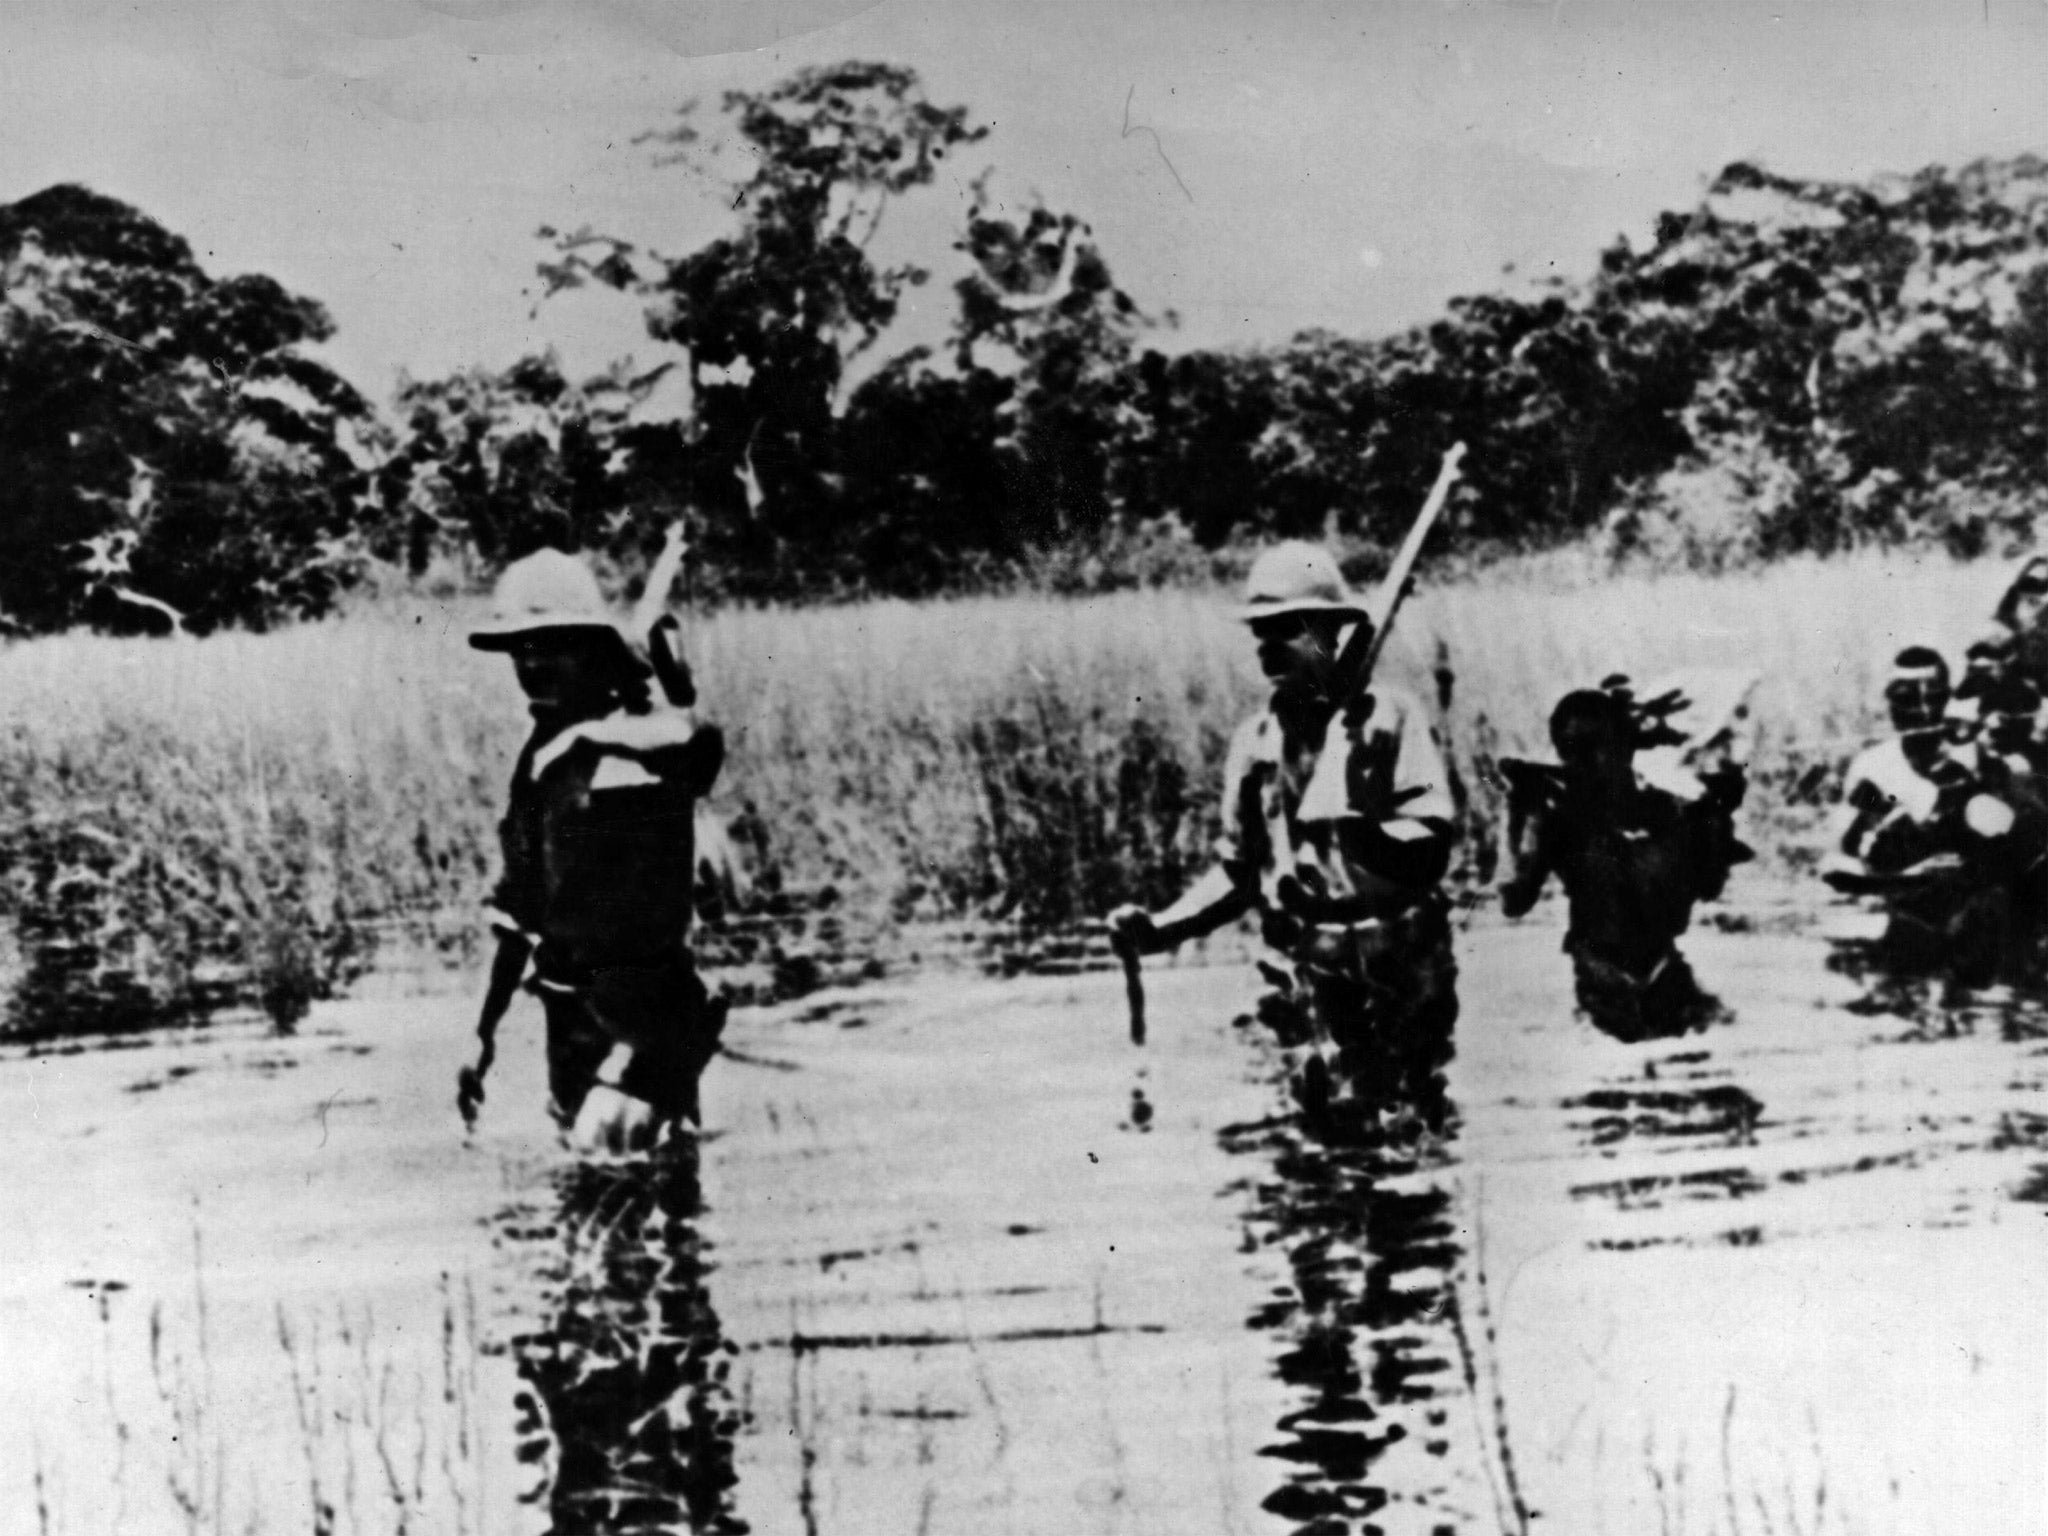 Allied troops in what is now Zambia, in vain pursuit of the forces of the elusive German general Paul von Lettow-Vorbeck